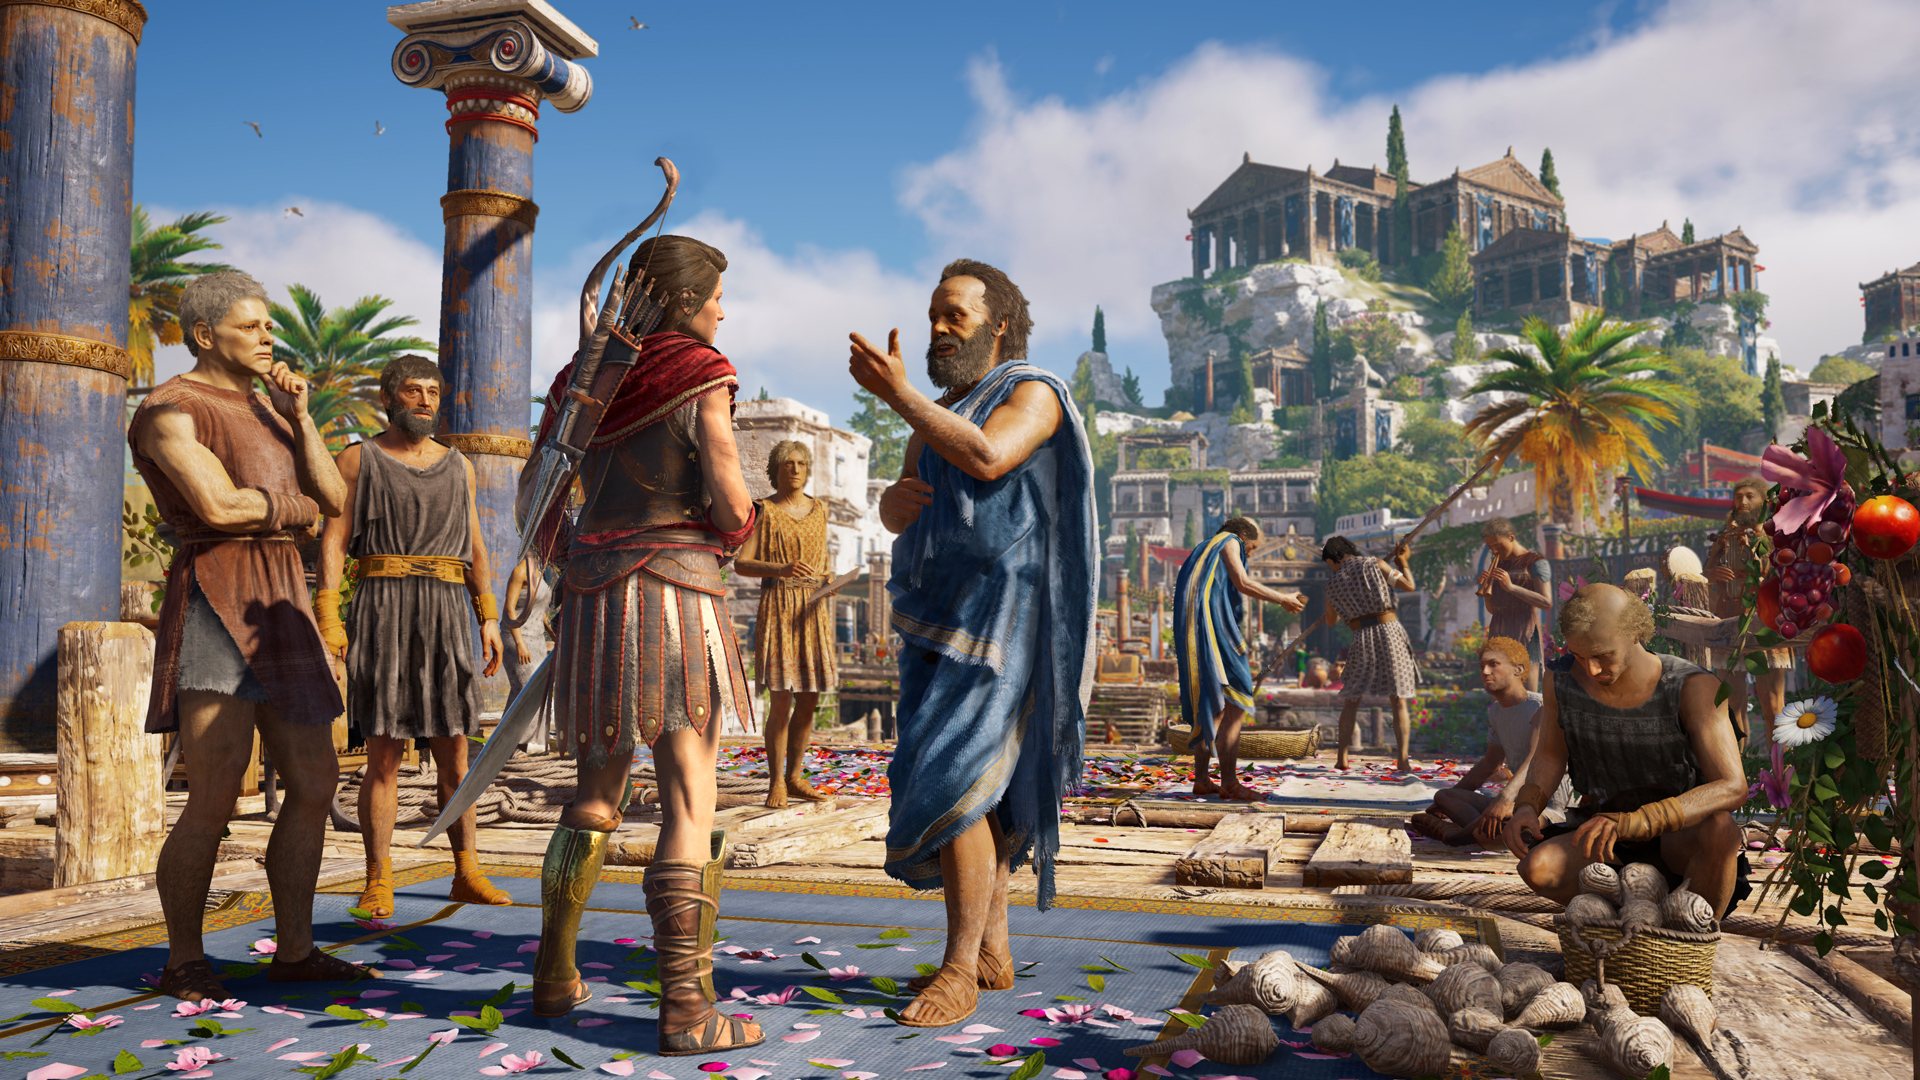 Assassin's Creed Odyssey PlayStation 4 Account Pixelpuffin.net Activation Link